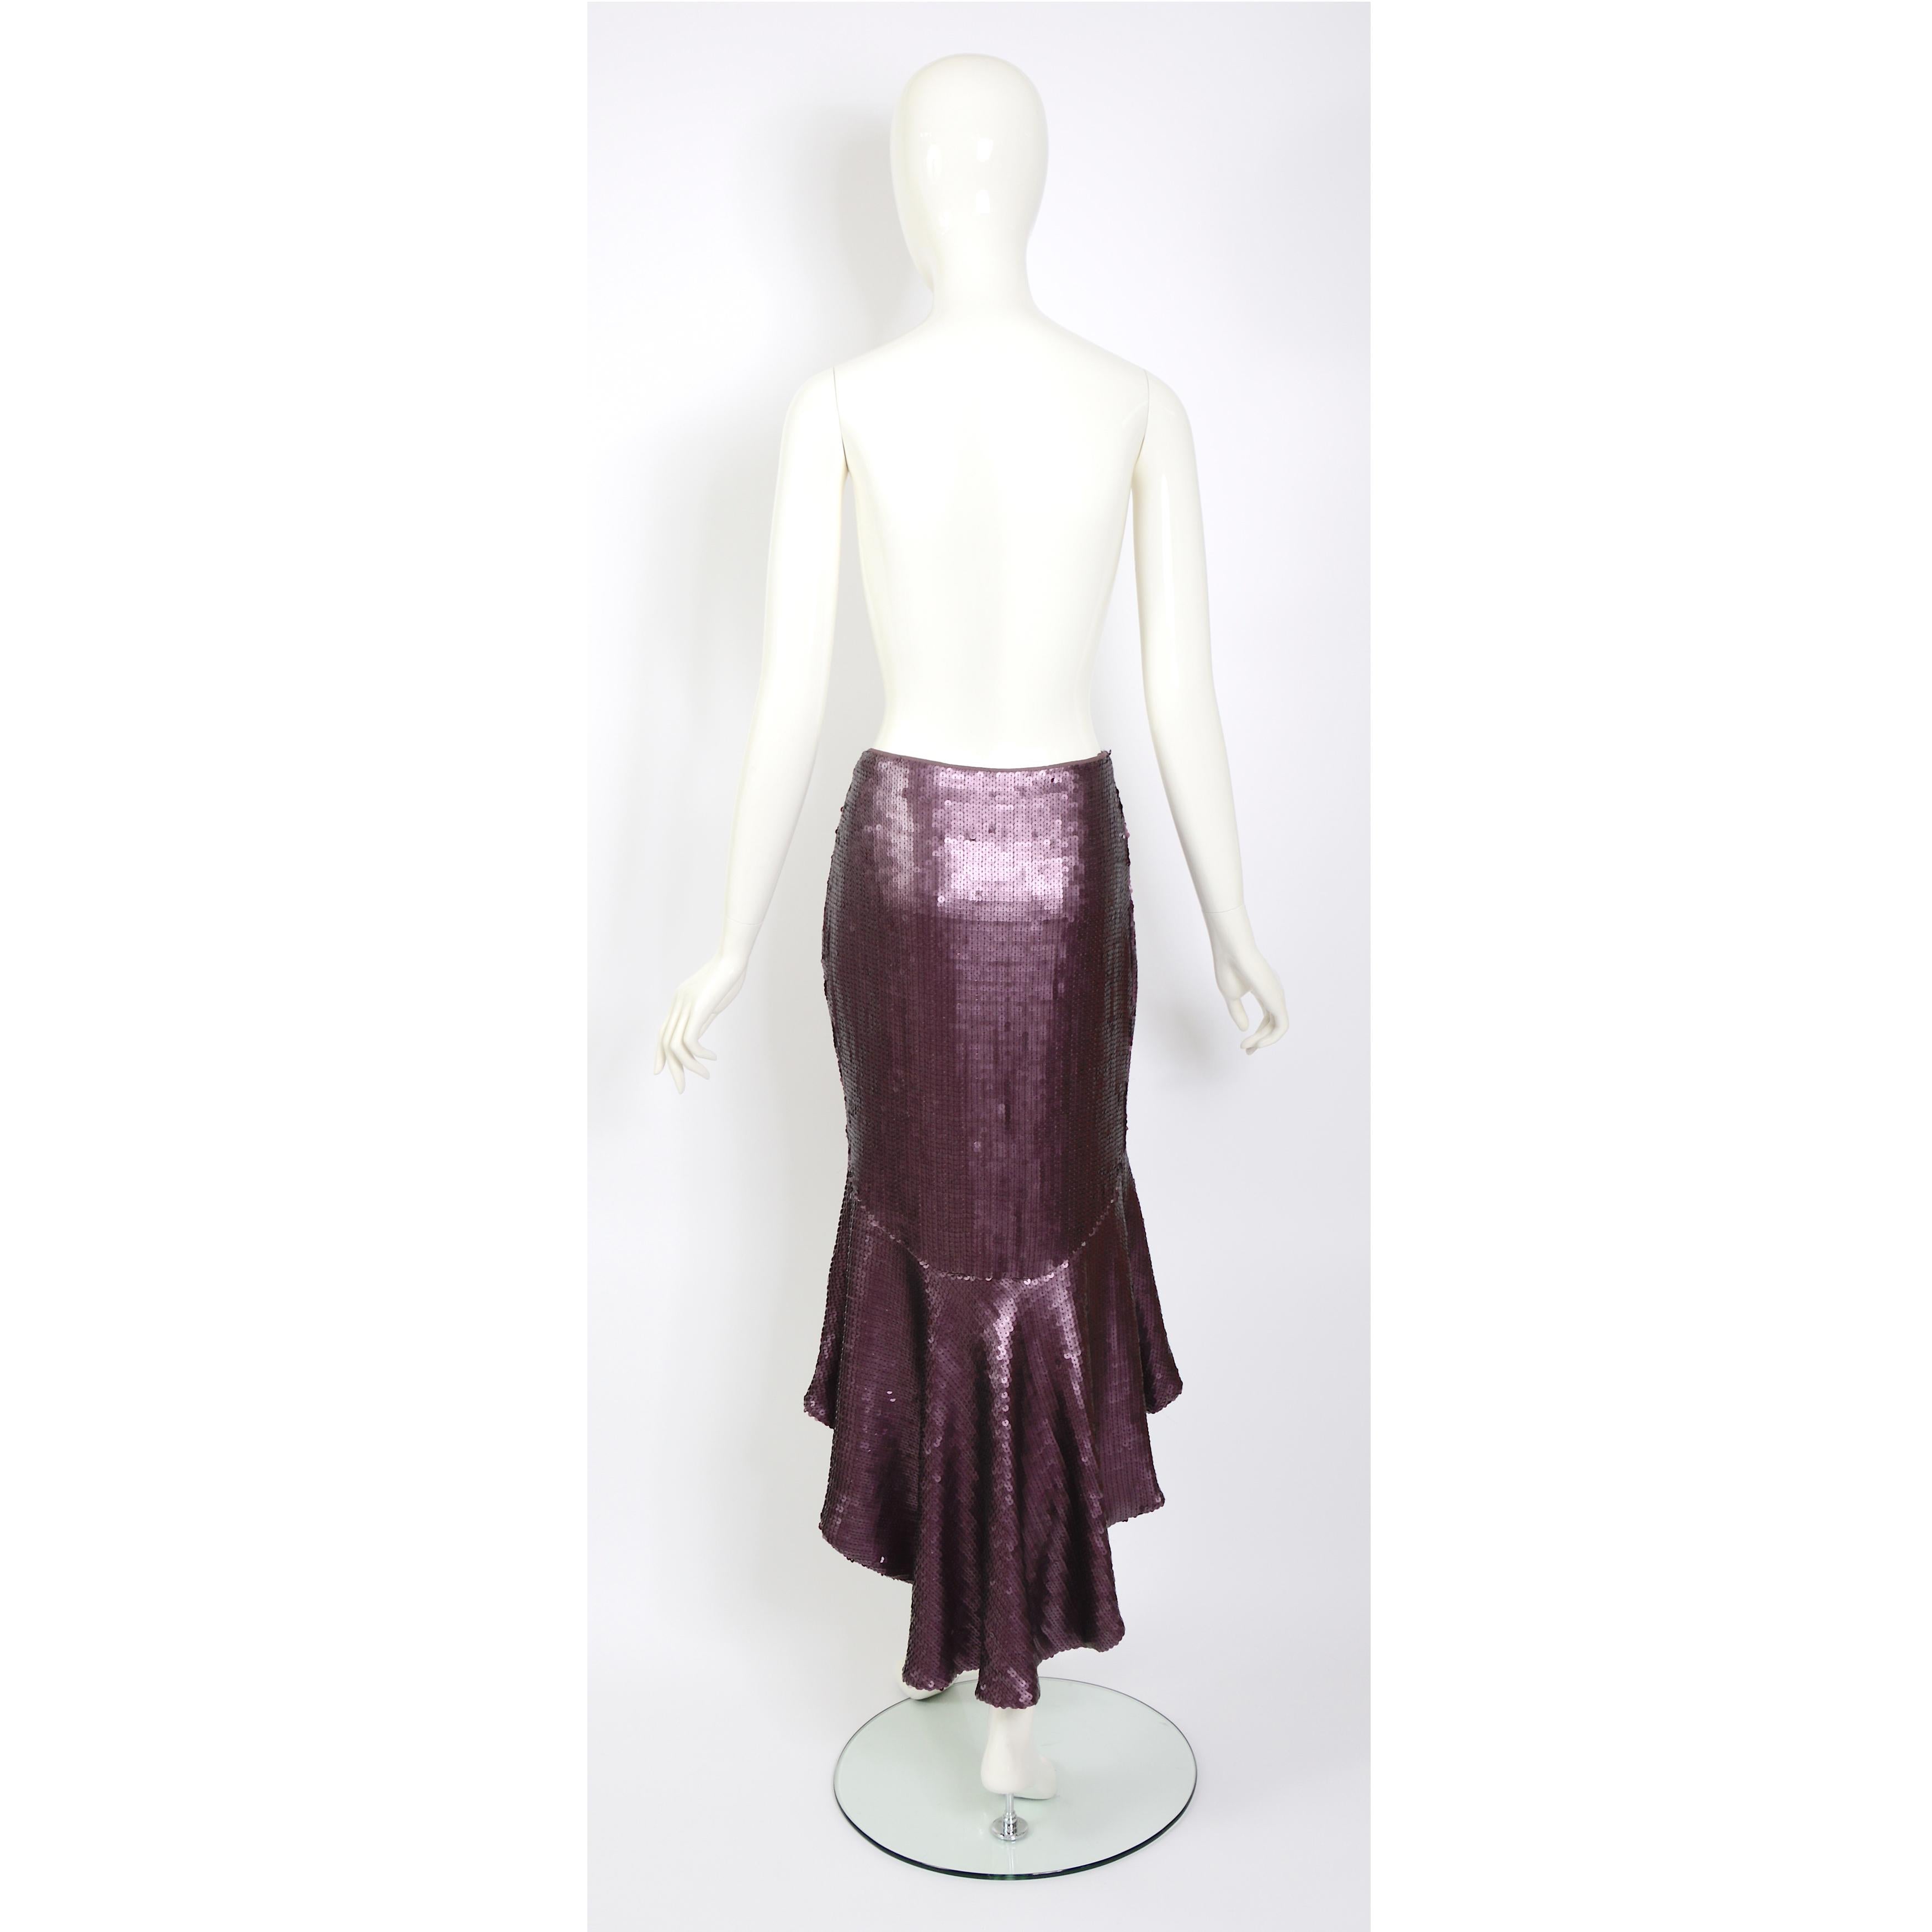 Chloé by Stella McCartney runway 1999 vintage sequin fishtail style skirt  For Sale 2